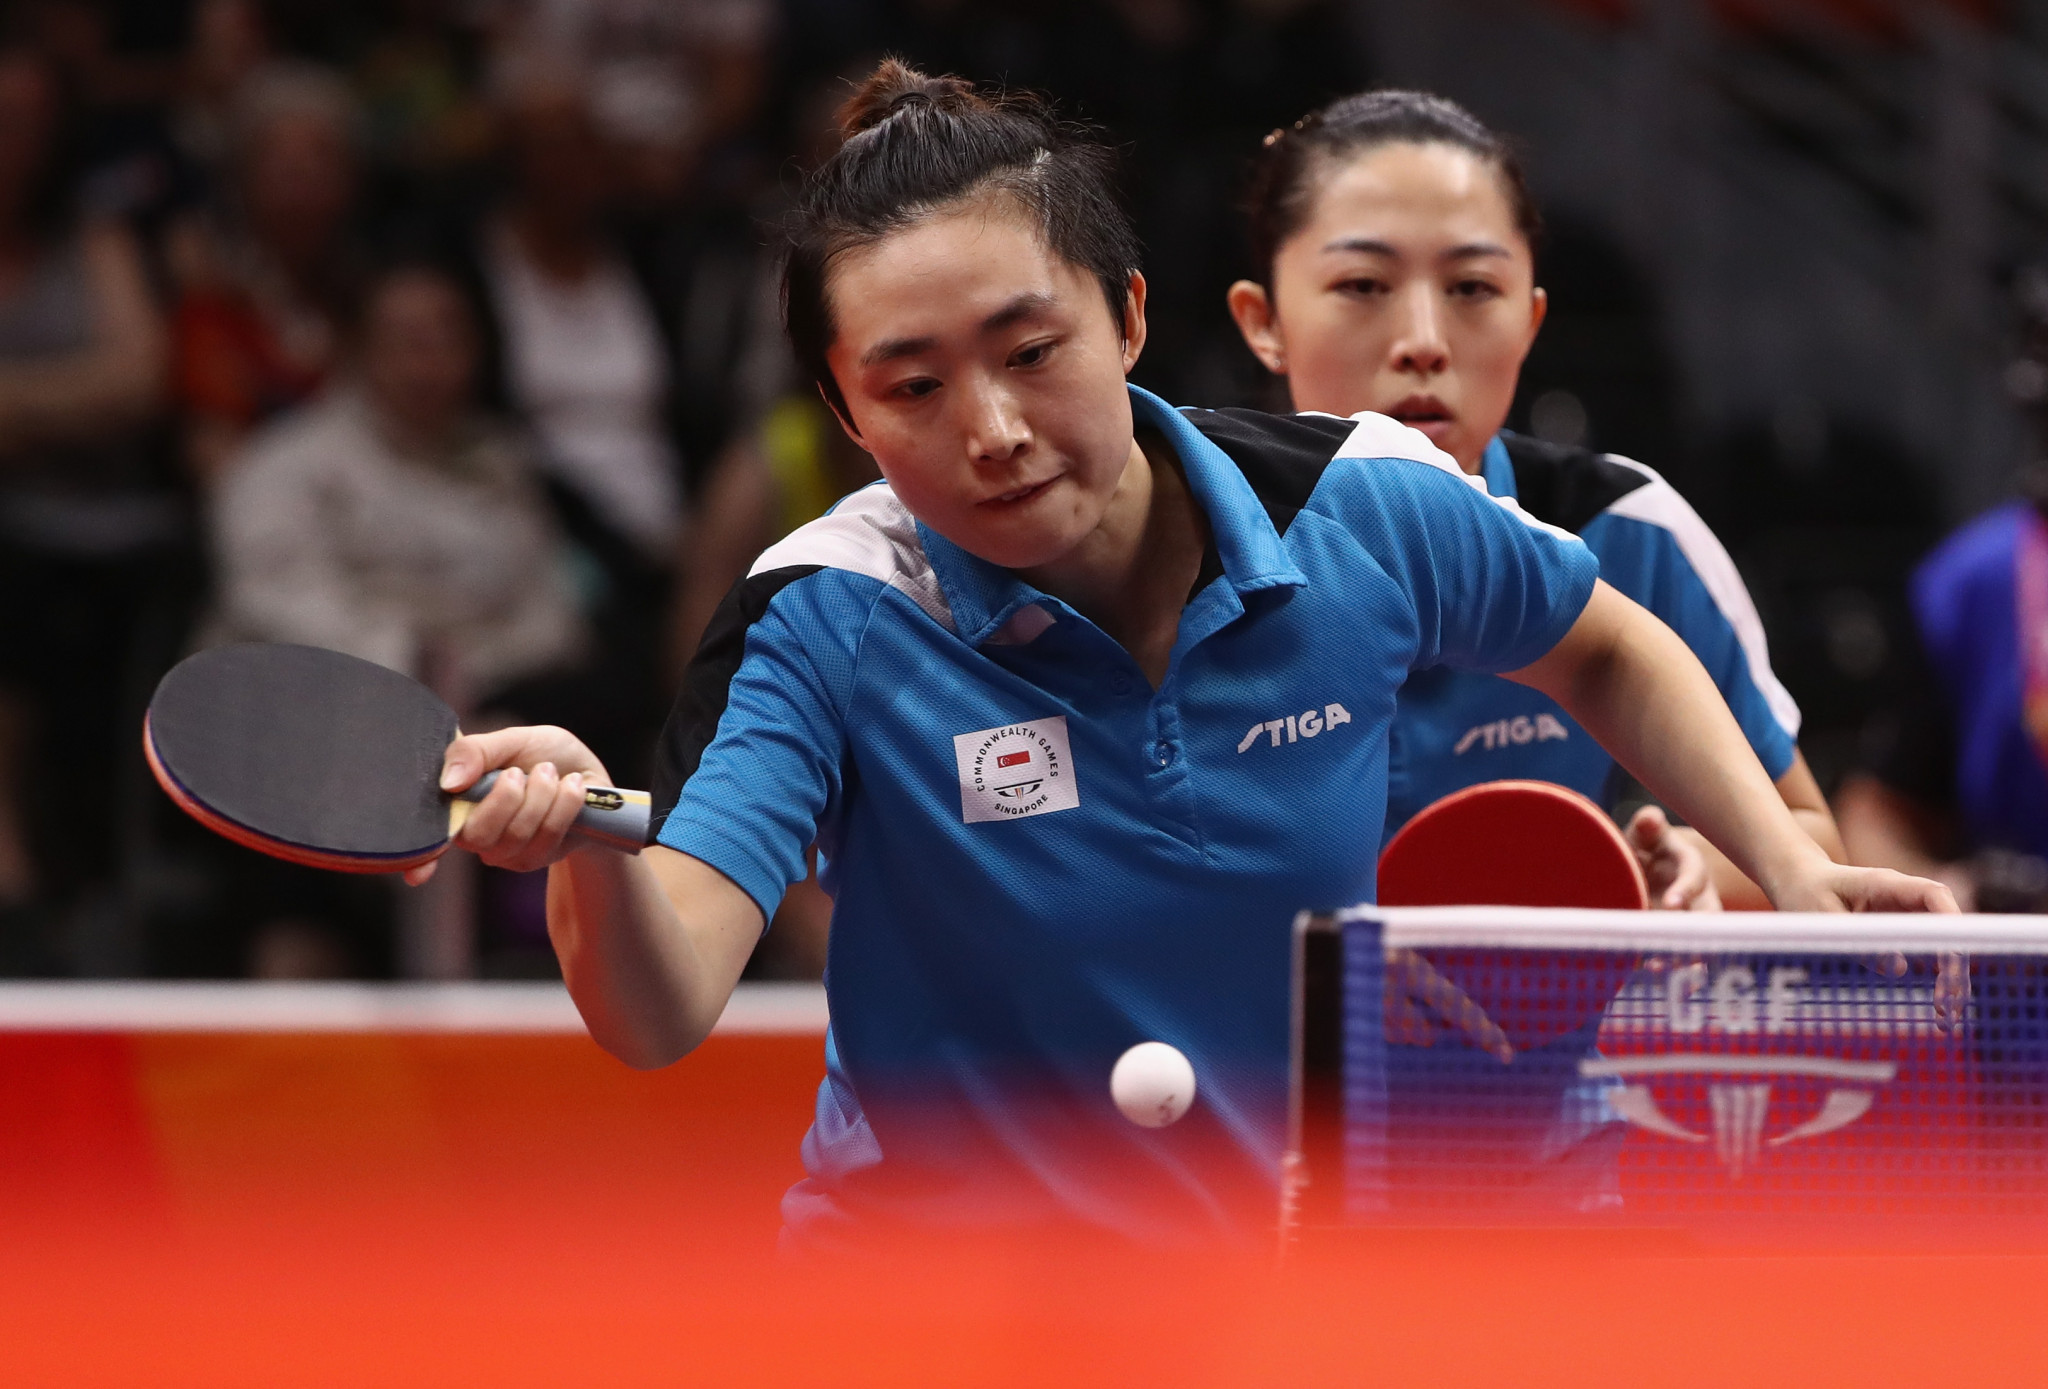 Singapore's Feng Tianwei and Yu Mengyu romped to a comfortable defence of their Commonwealth Games women's doubles title ©Getty Images